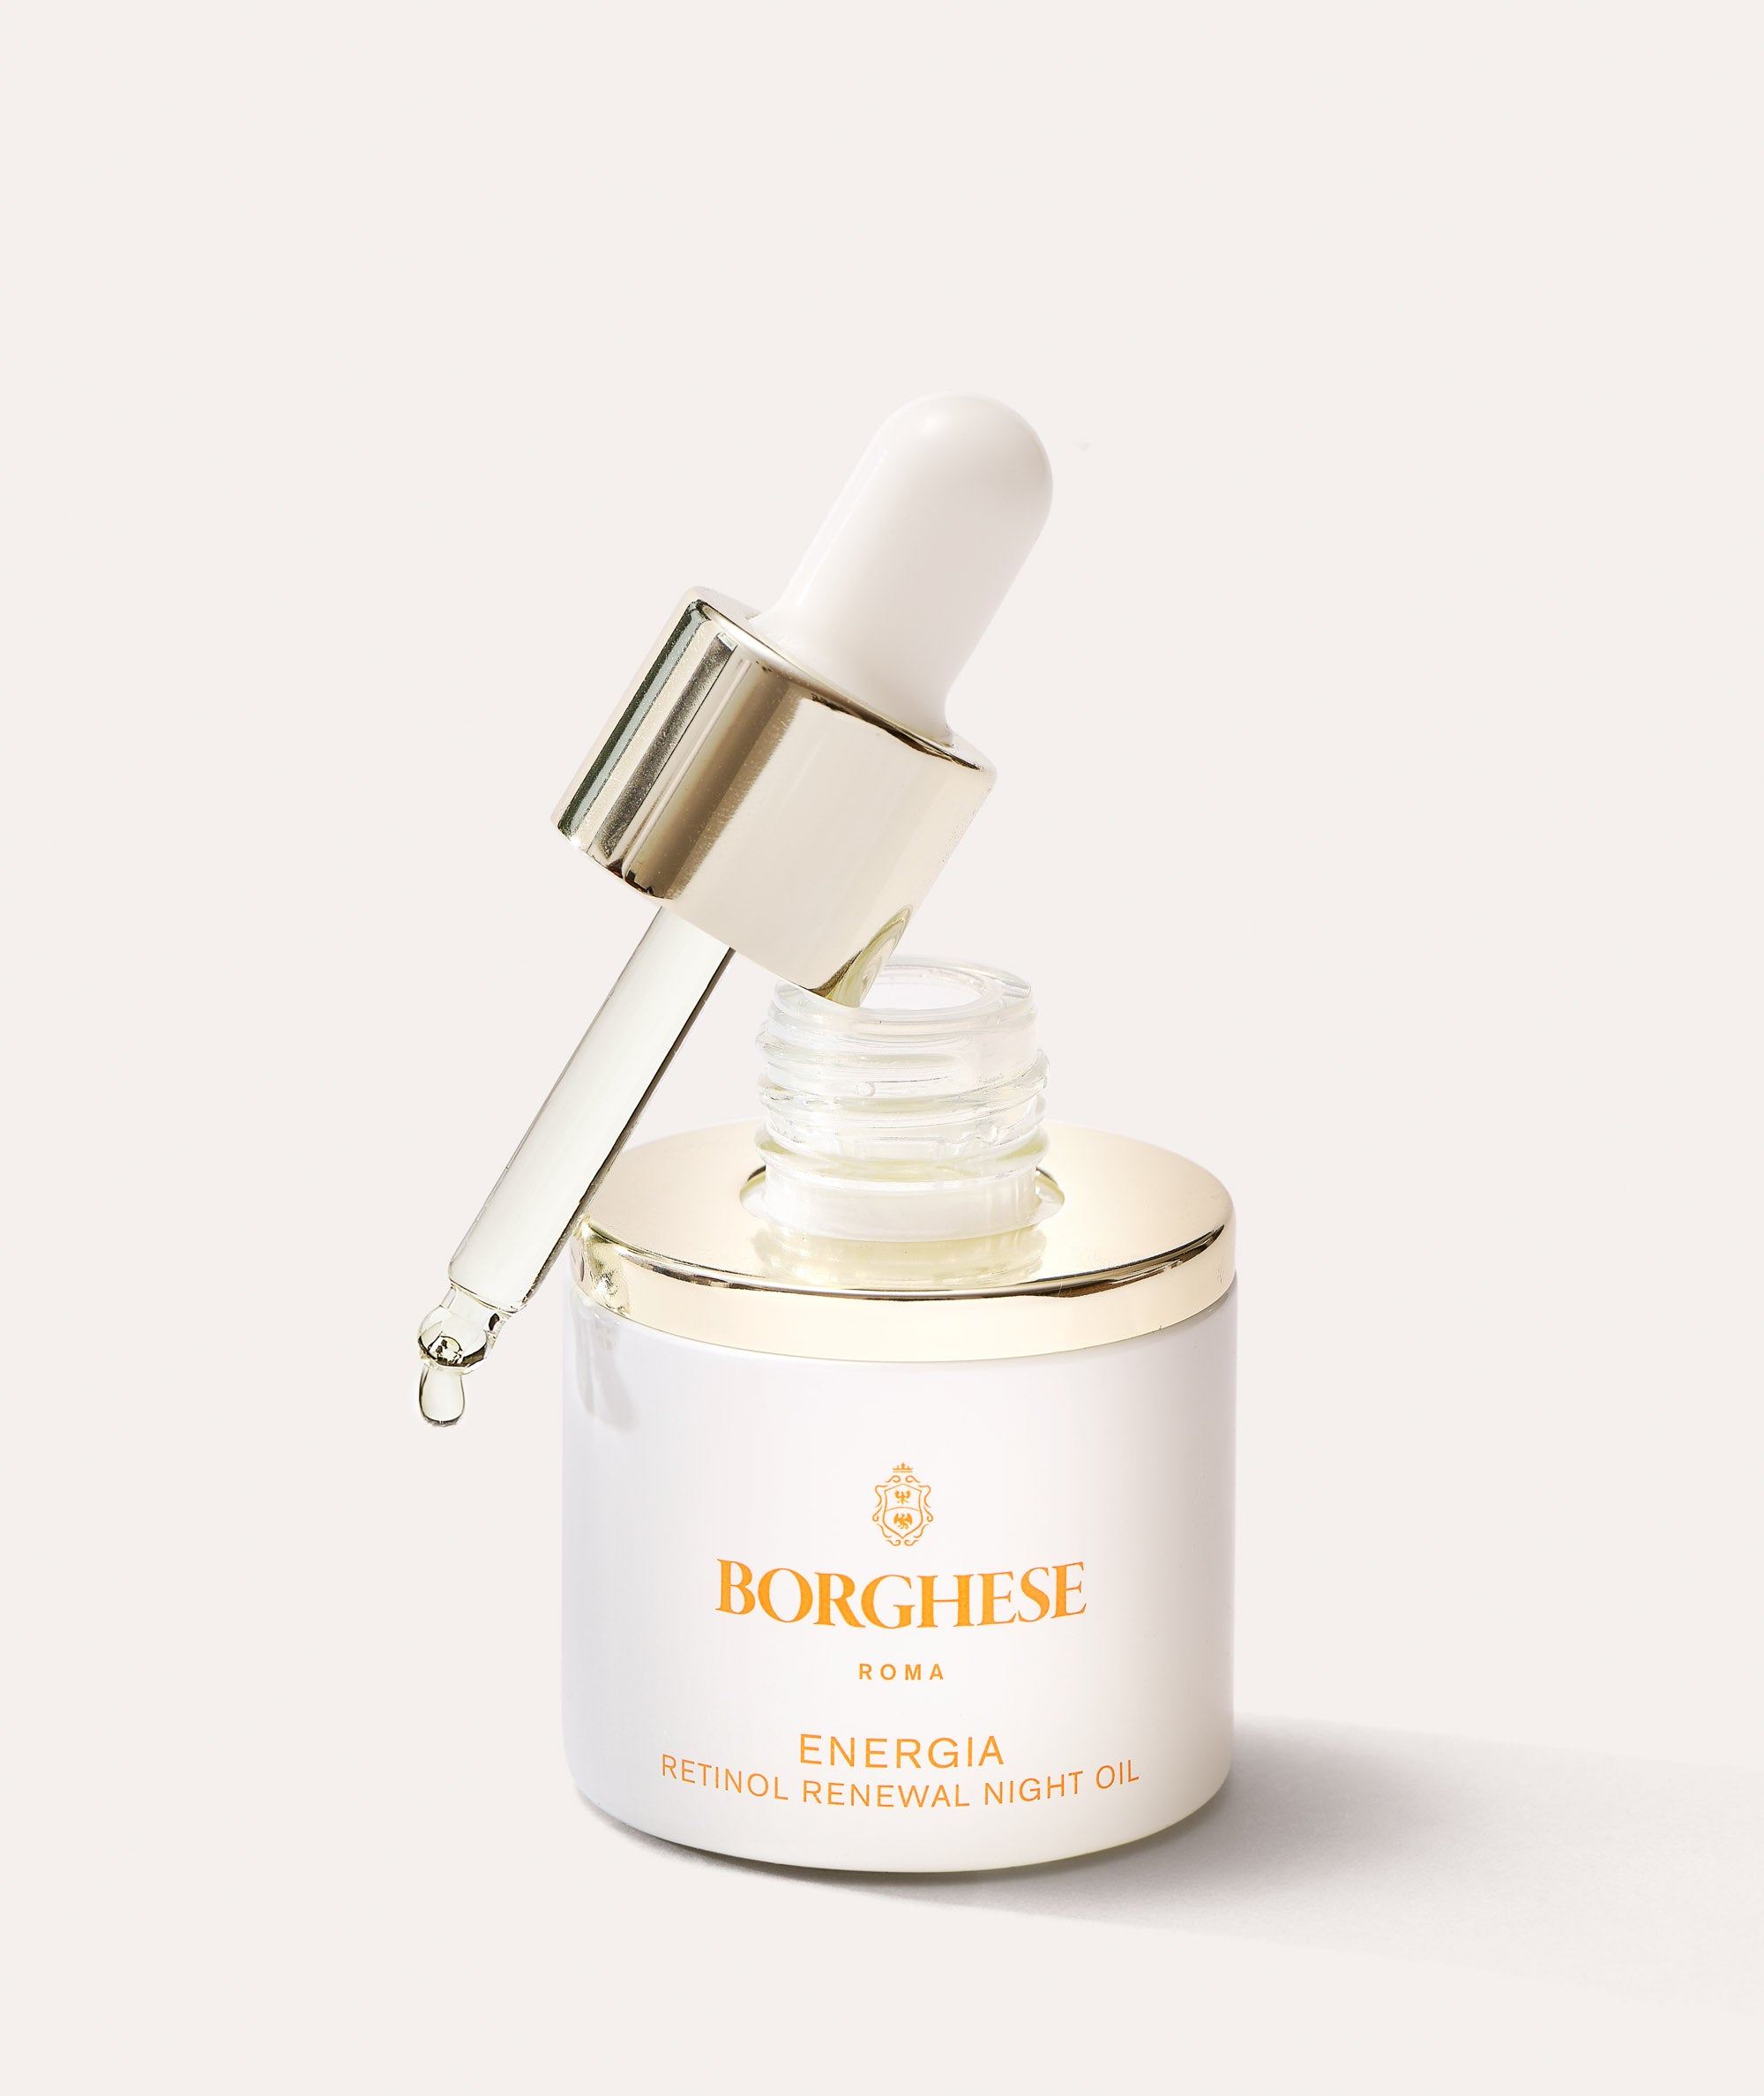 This is a picture of Borghese ENERGIA Retinol Renewal Night Oil bottle opened to show dispenser